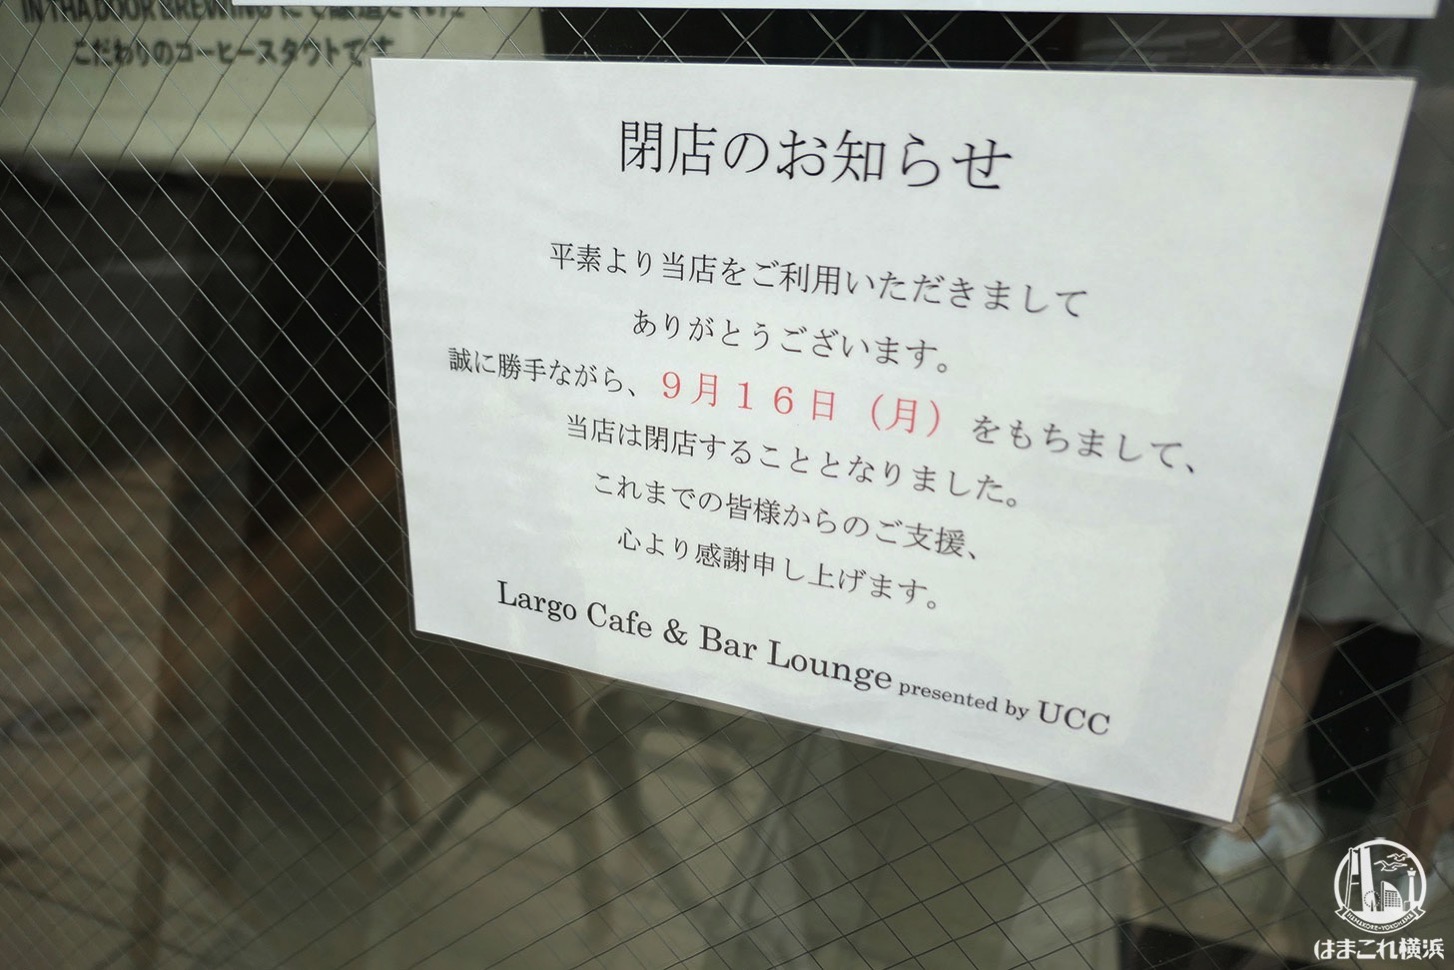 Largo Cafe ＆ Bar Lounge presented by UCC 閉店のお知らせ